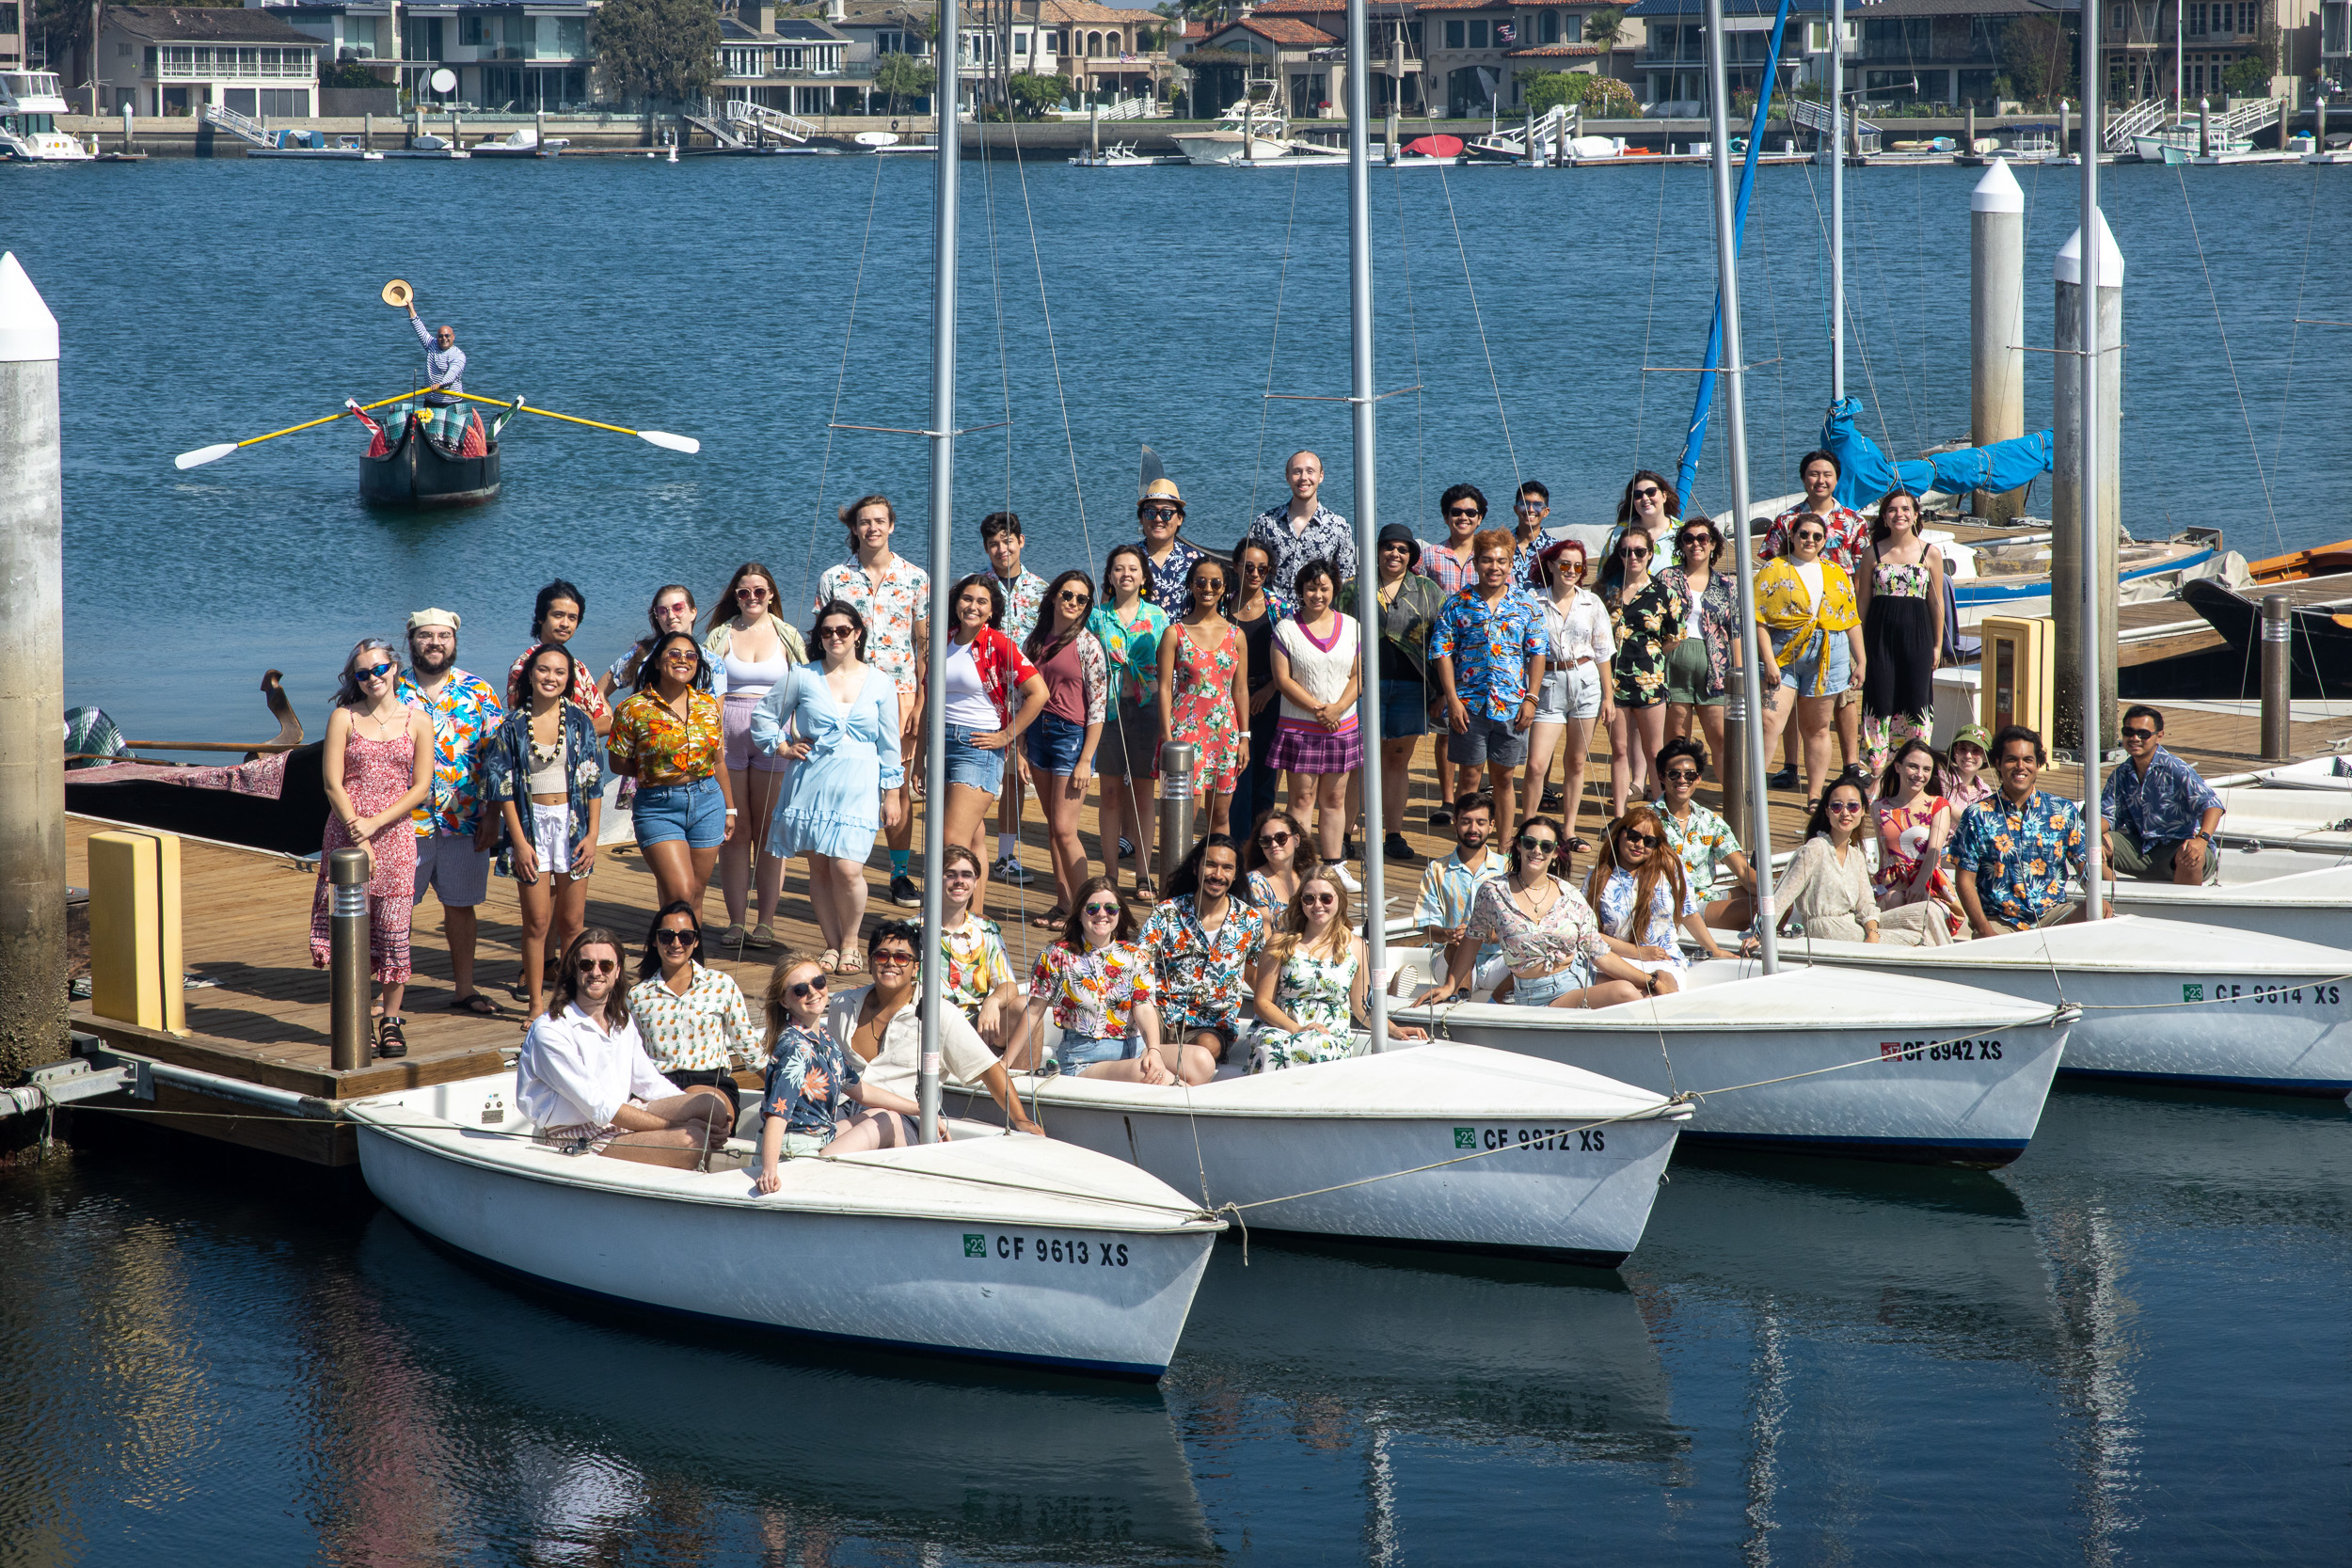 University Choir members standing on a dock in and around small boats.